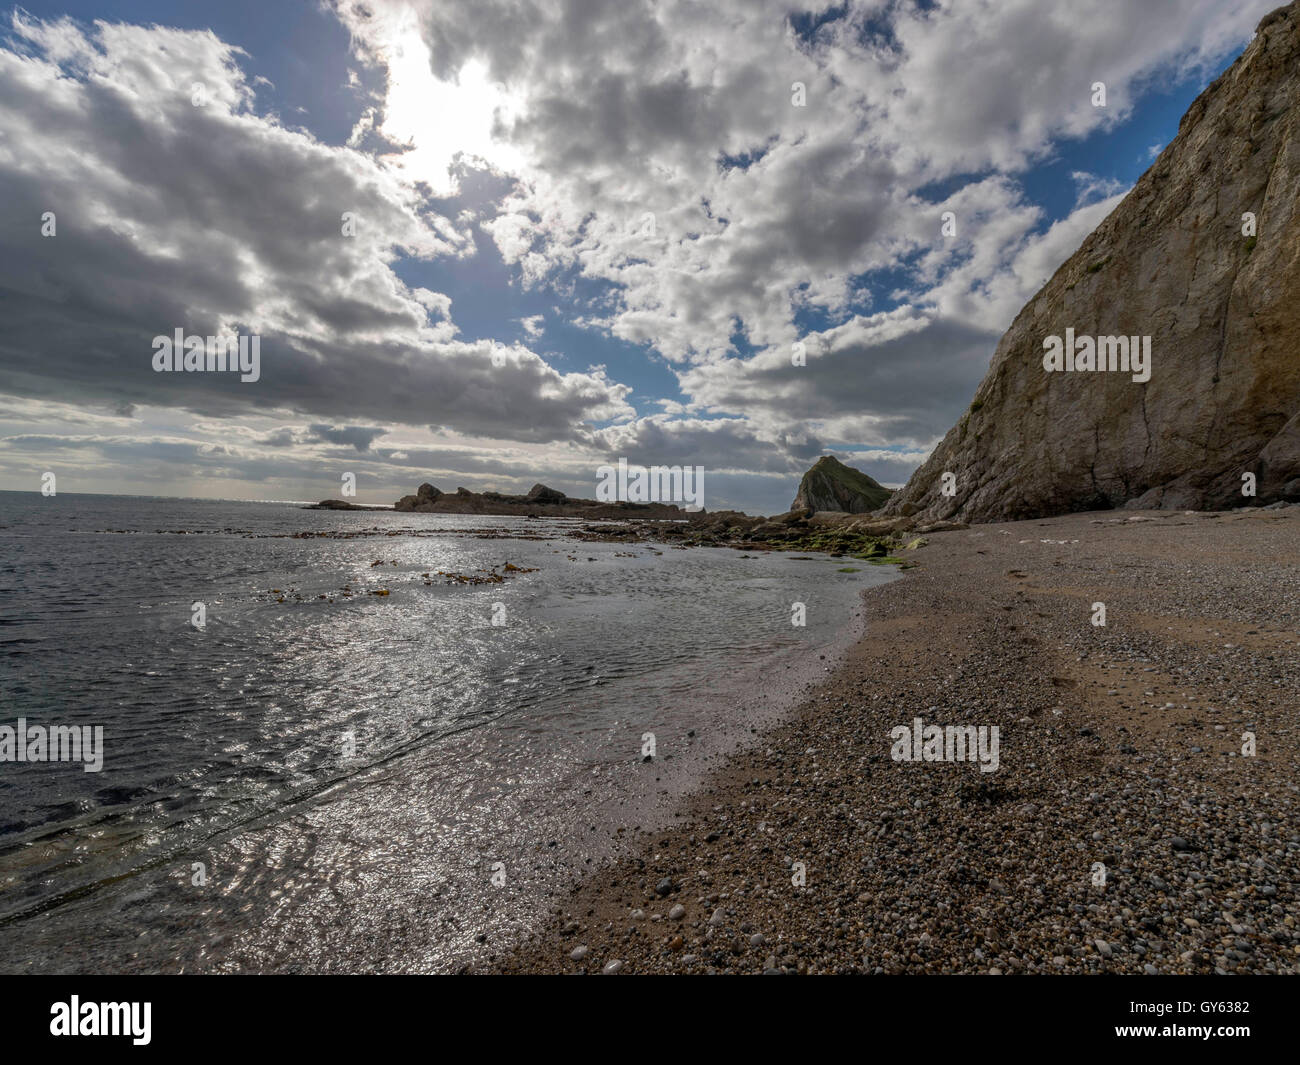 Landscape depicting the rocky Man O'War shoreline on fine summer day with Durdle Door headland in the background. Stock Photo